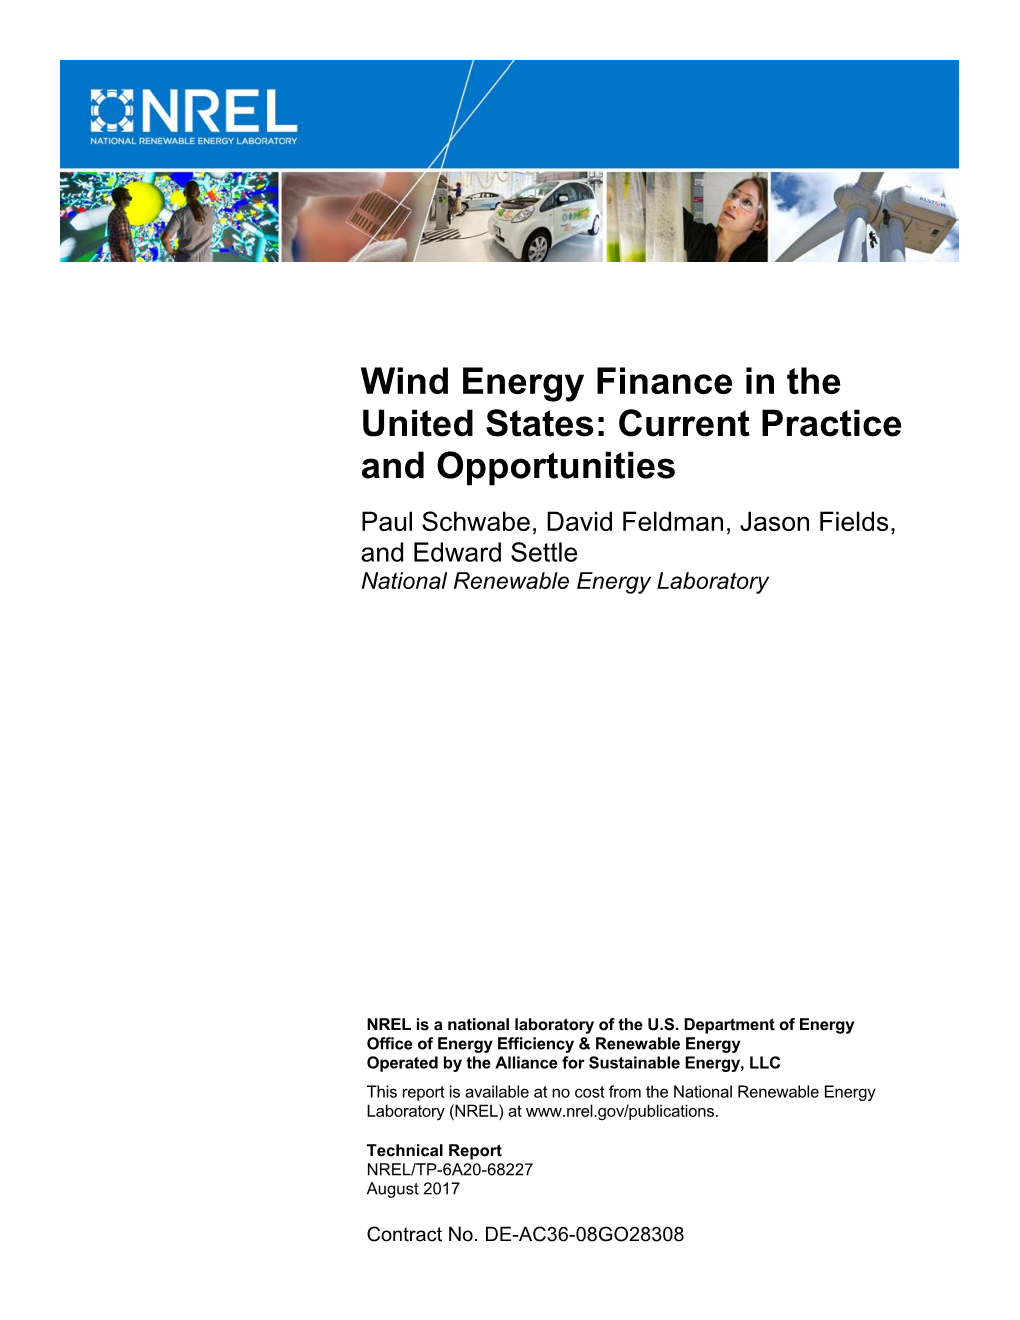 Wind Energy Finance in the United States